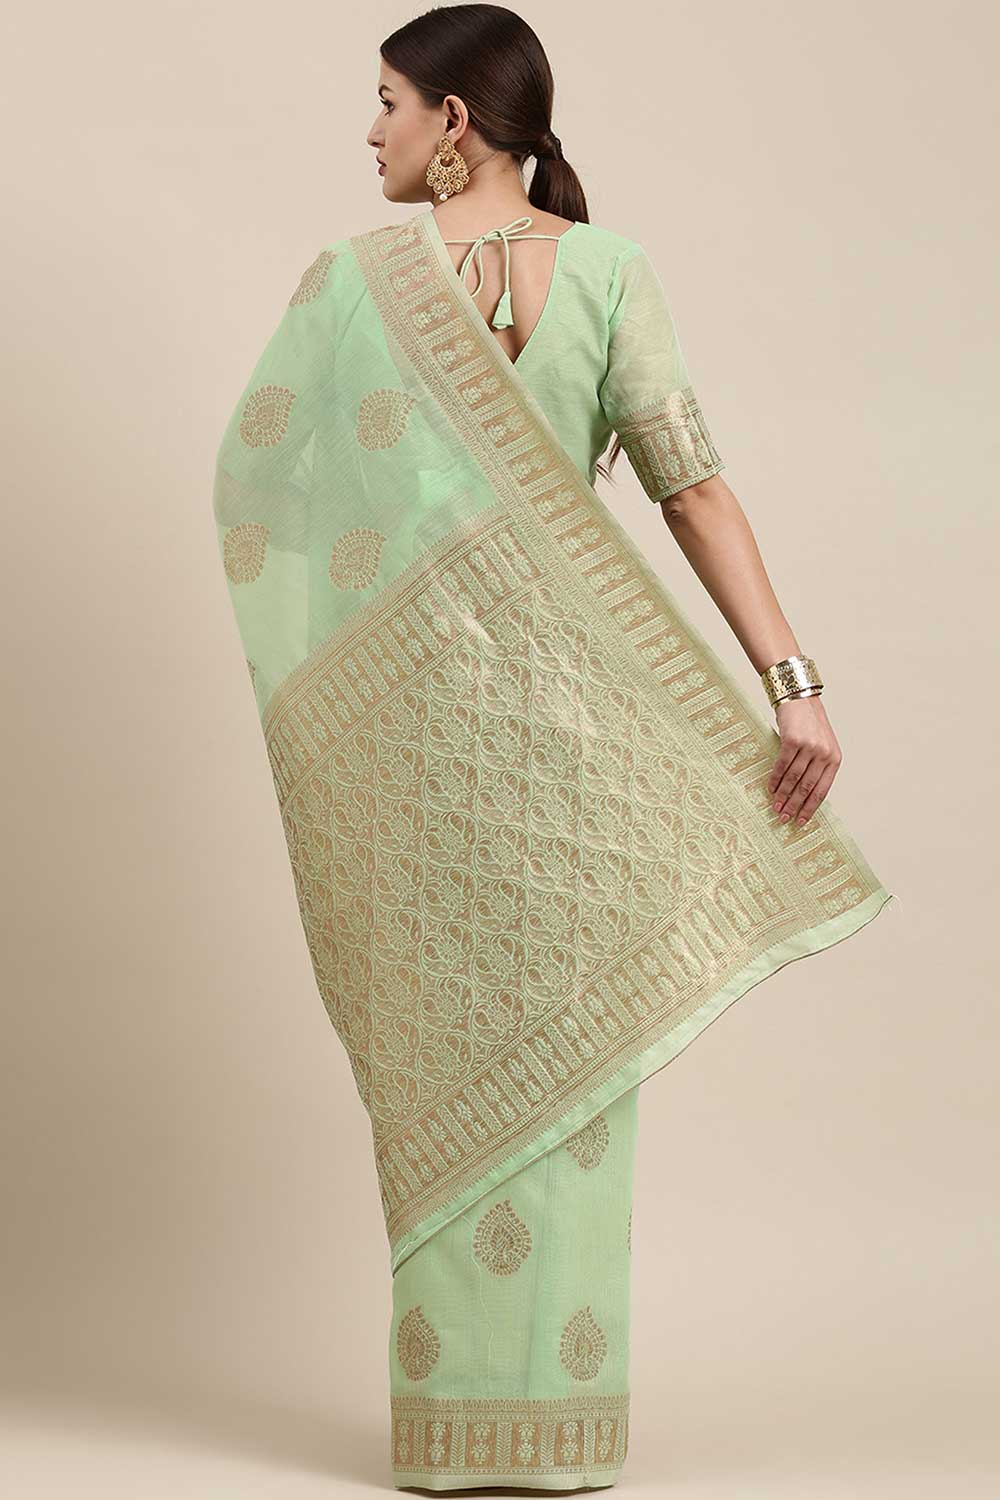 Shop Mindy Green Bagh Blended Linen One Minute Saree at best offer at our  Store - One Minute Saree